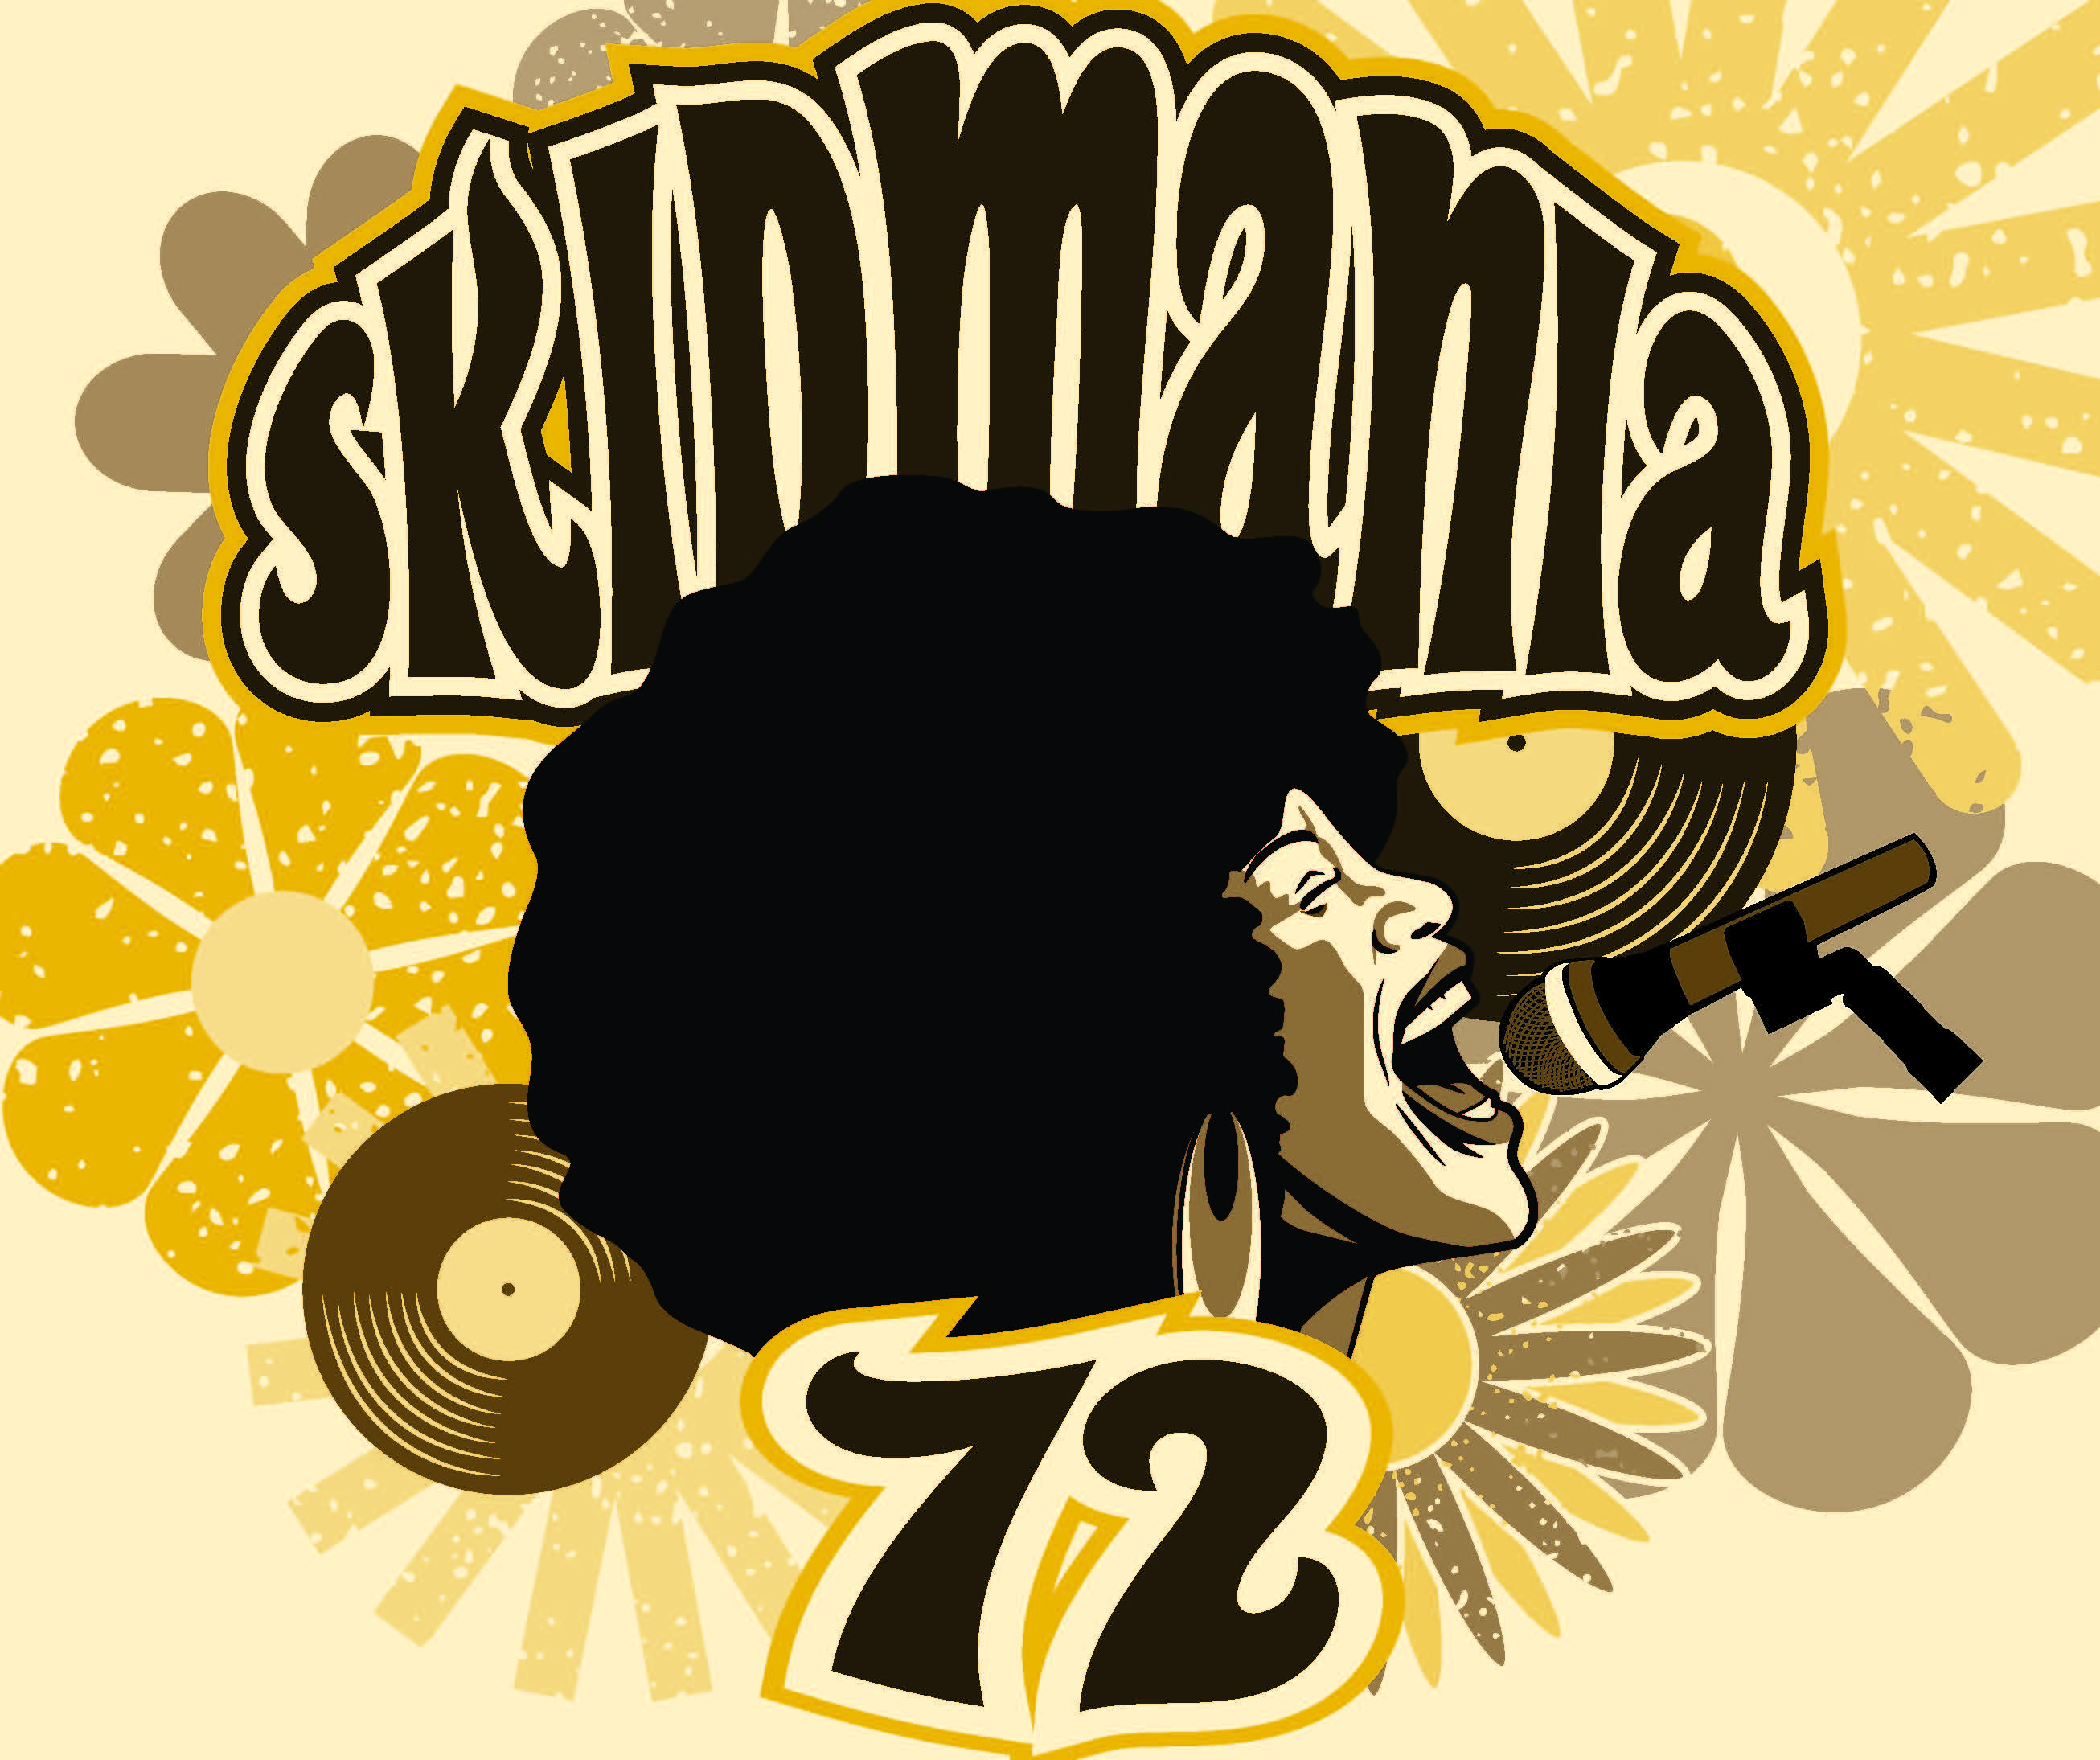 Anjolee Lavery ’23 provided original artwork for this year’s Skidmania ’72 poster.